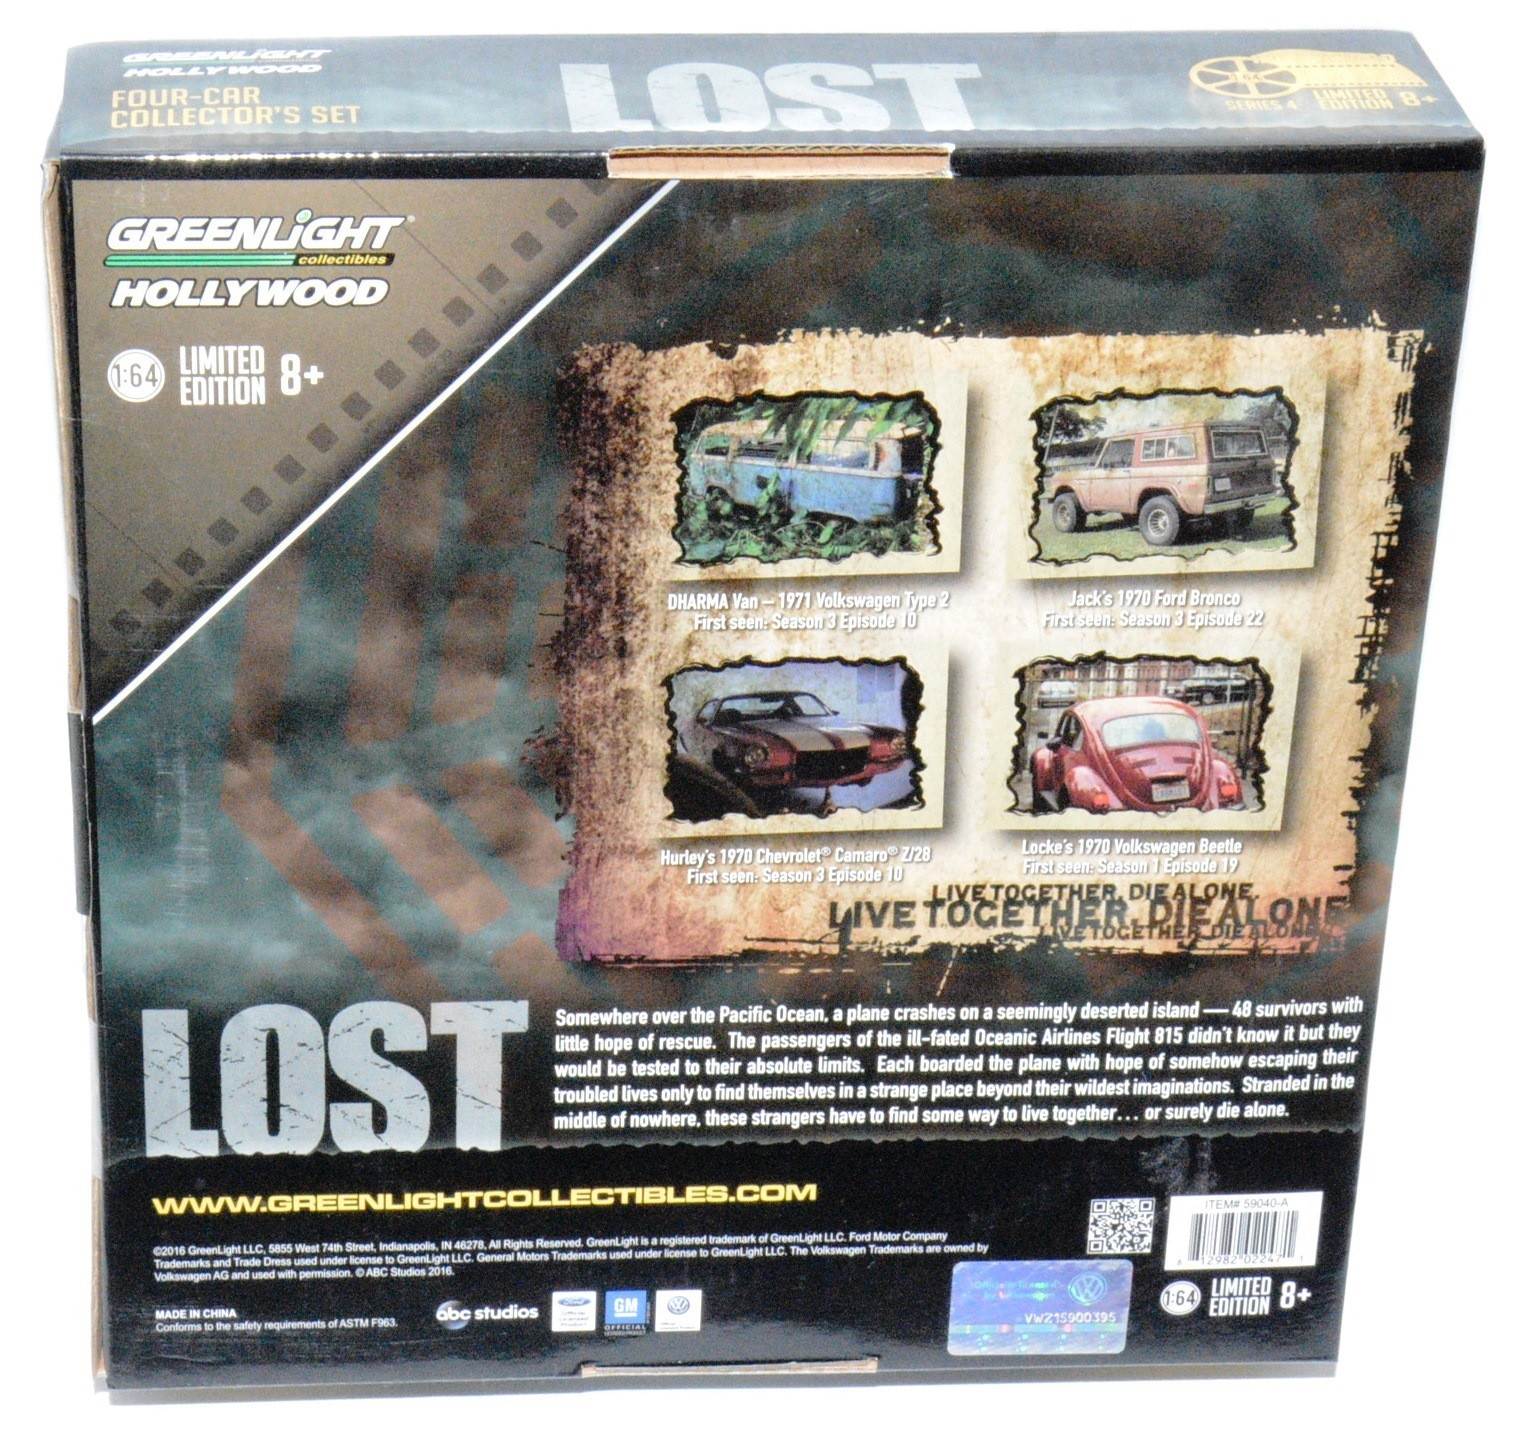 Greenlight Hollywood Lost Four-Car Collector's Set